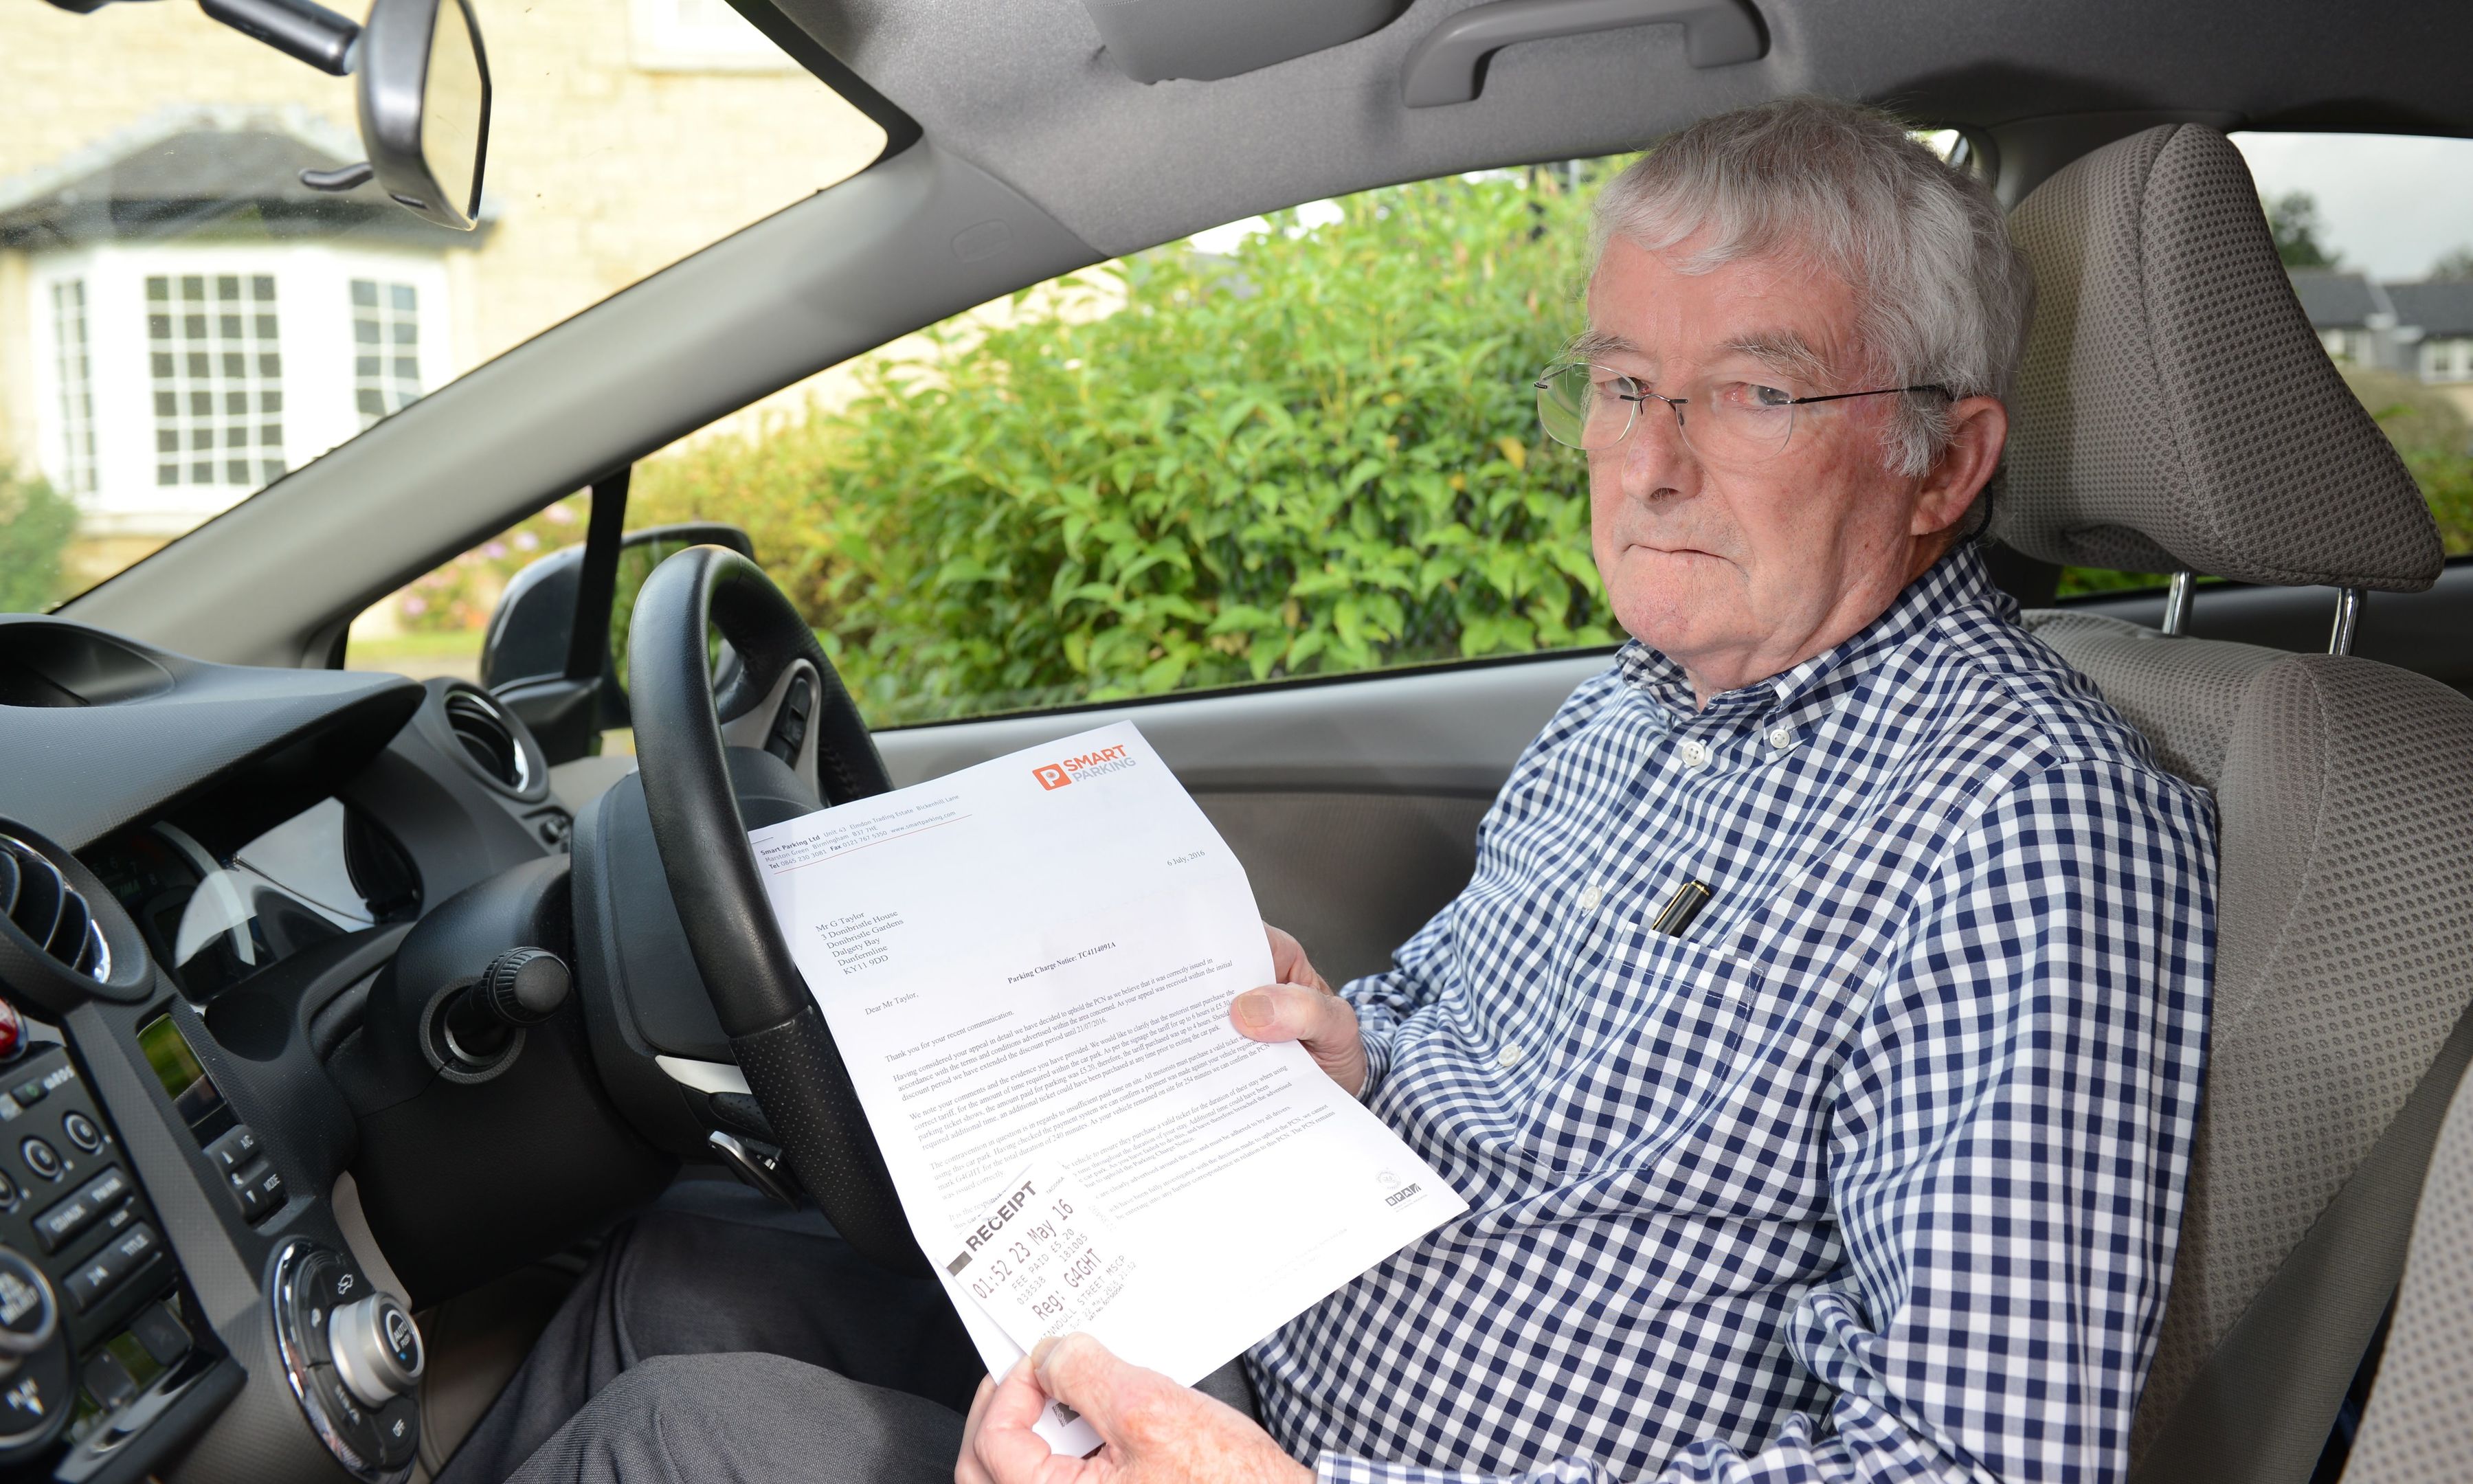 George Taylor from Fife has been charged £160 for underpaying by 10p